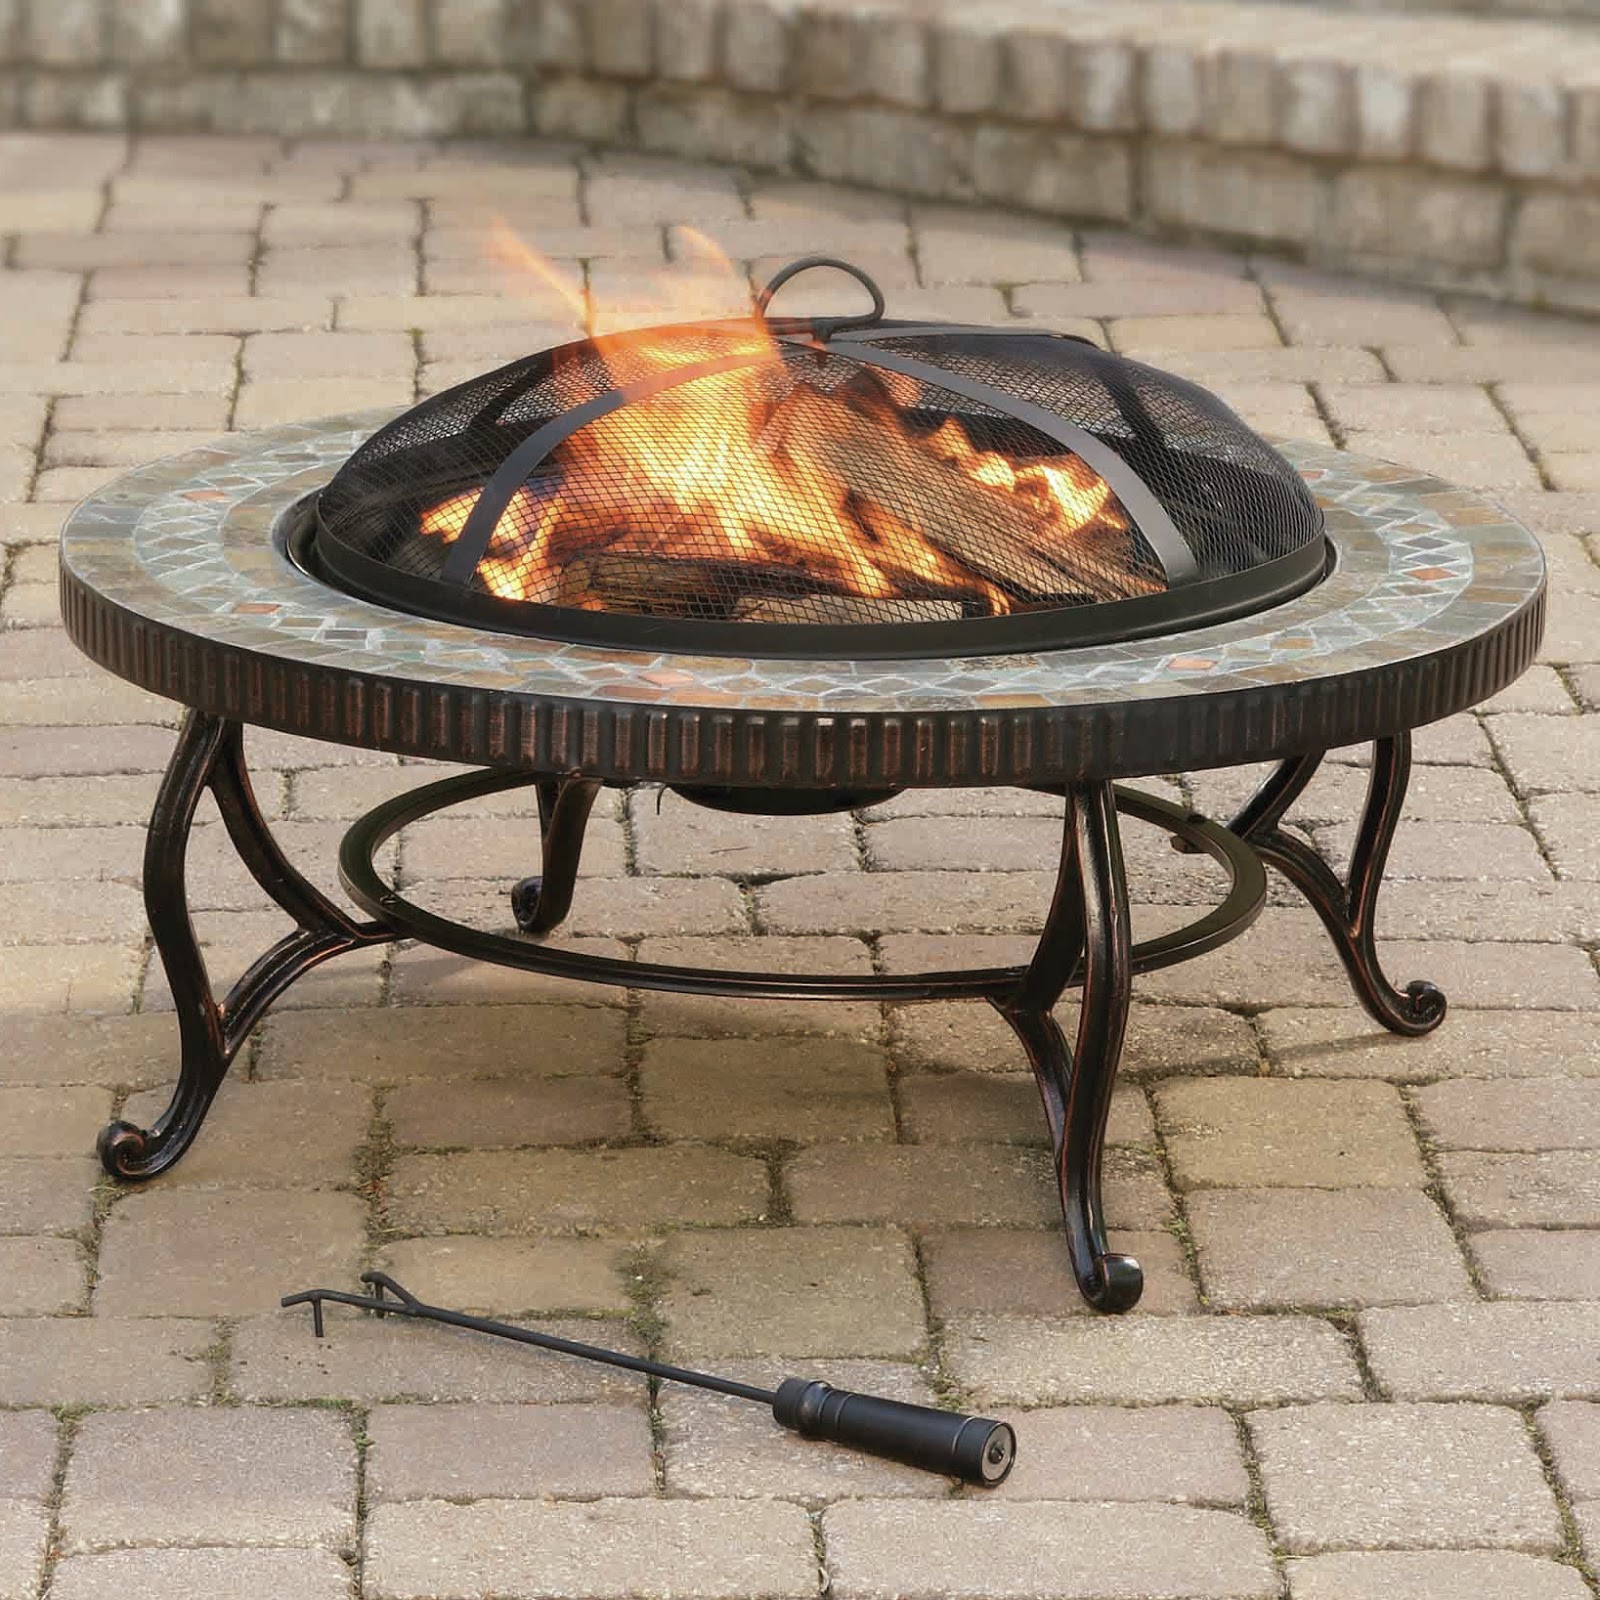 Updated Law Concerning Fire Pits and Related Devices in Effect